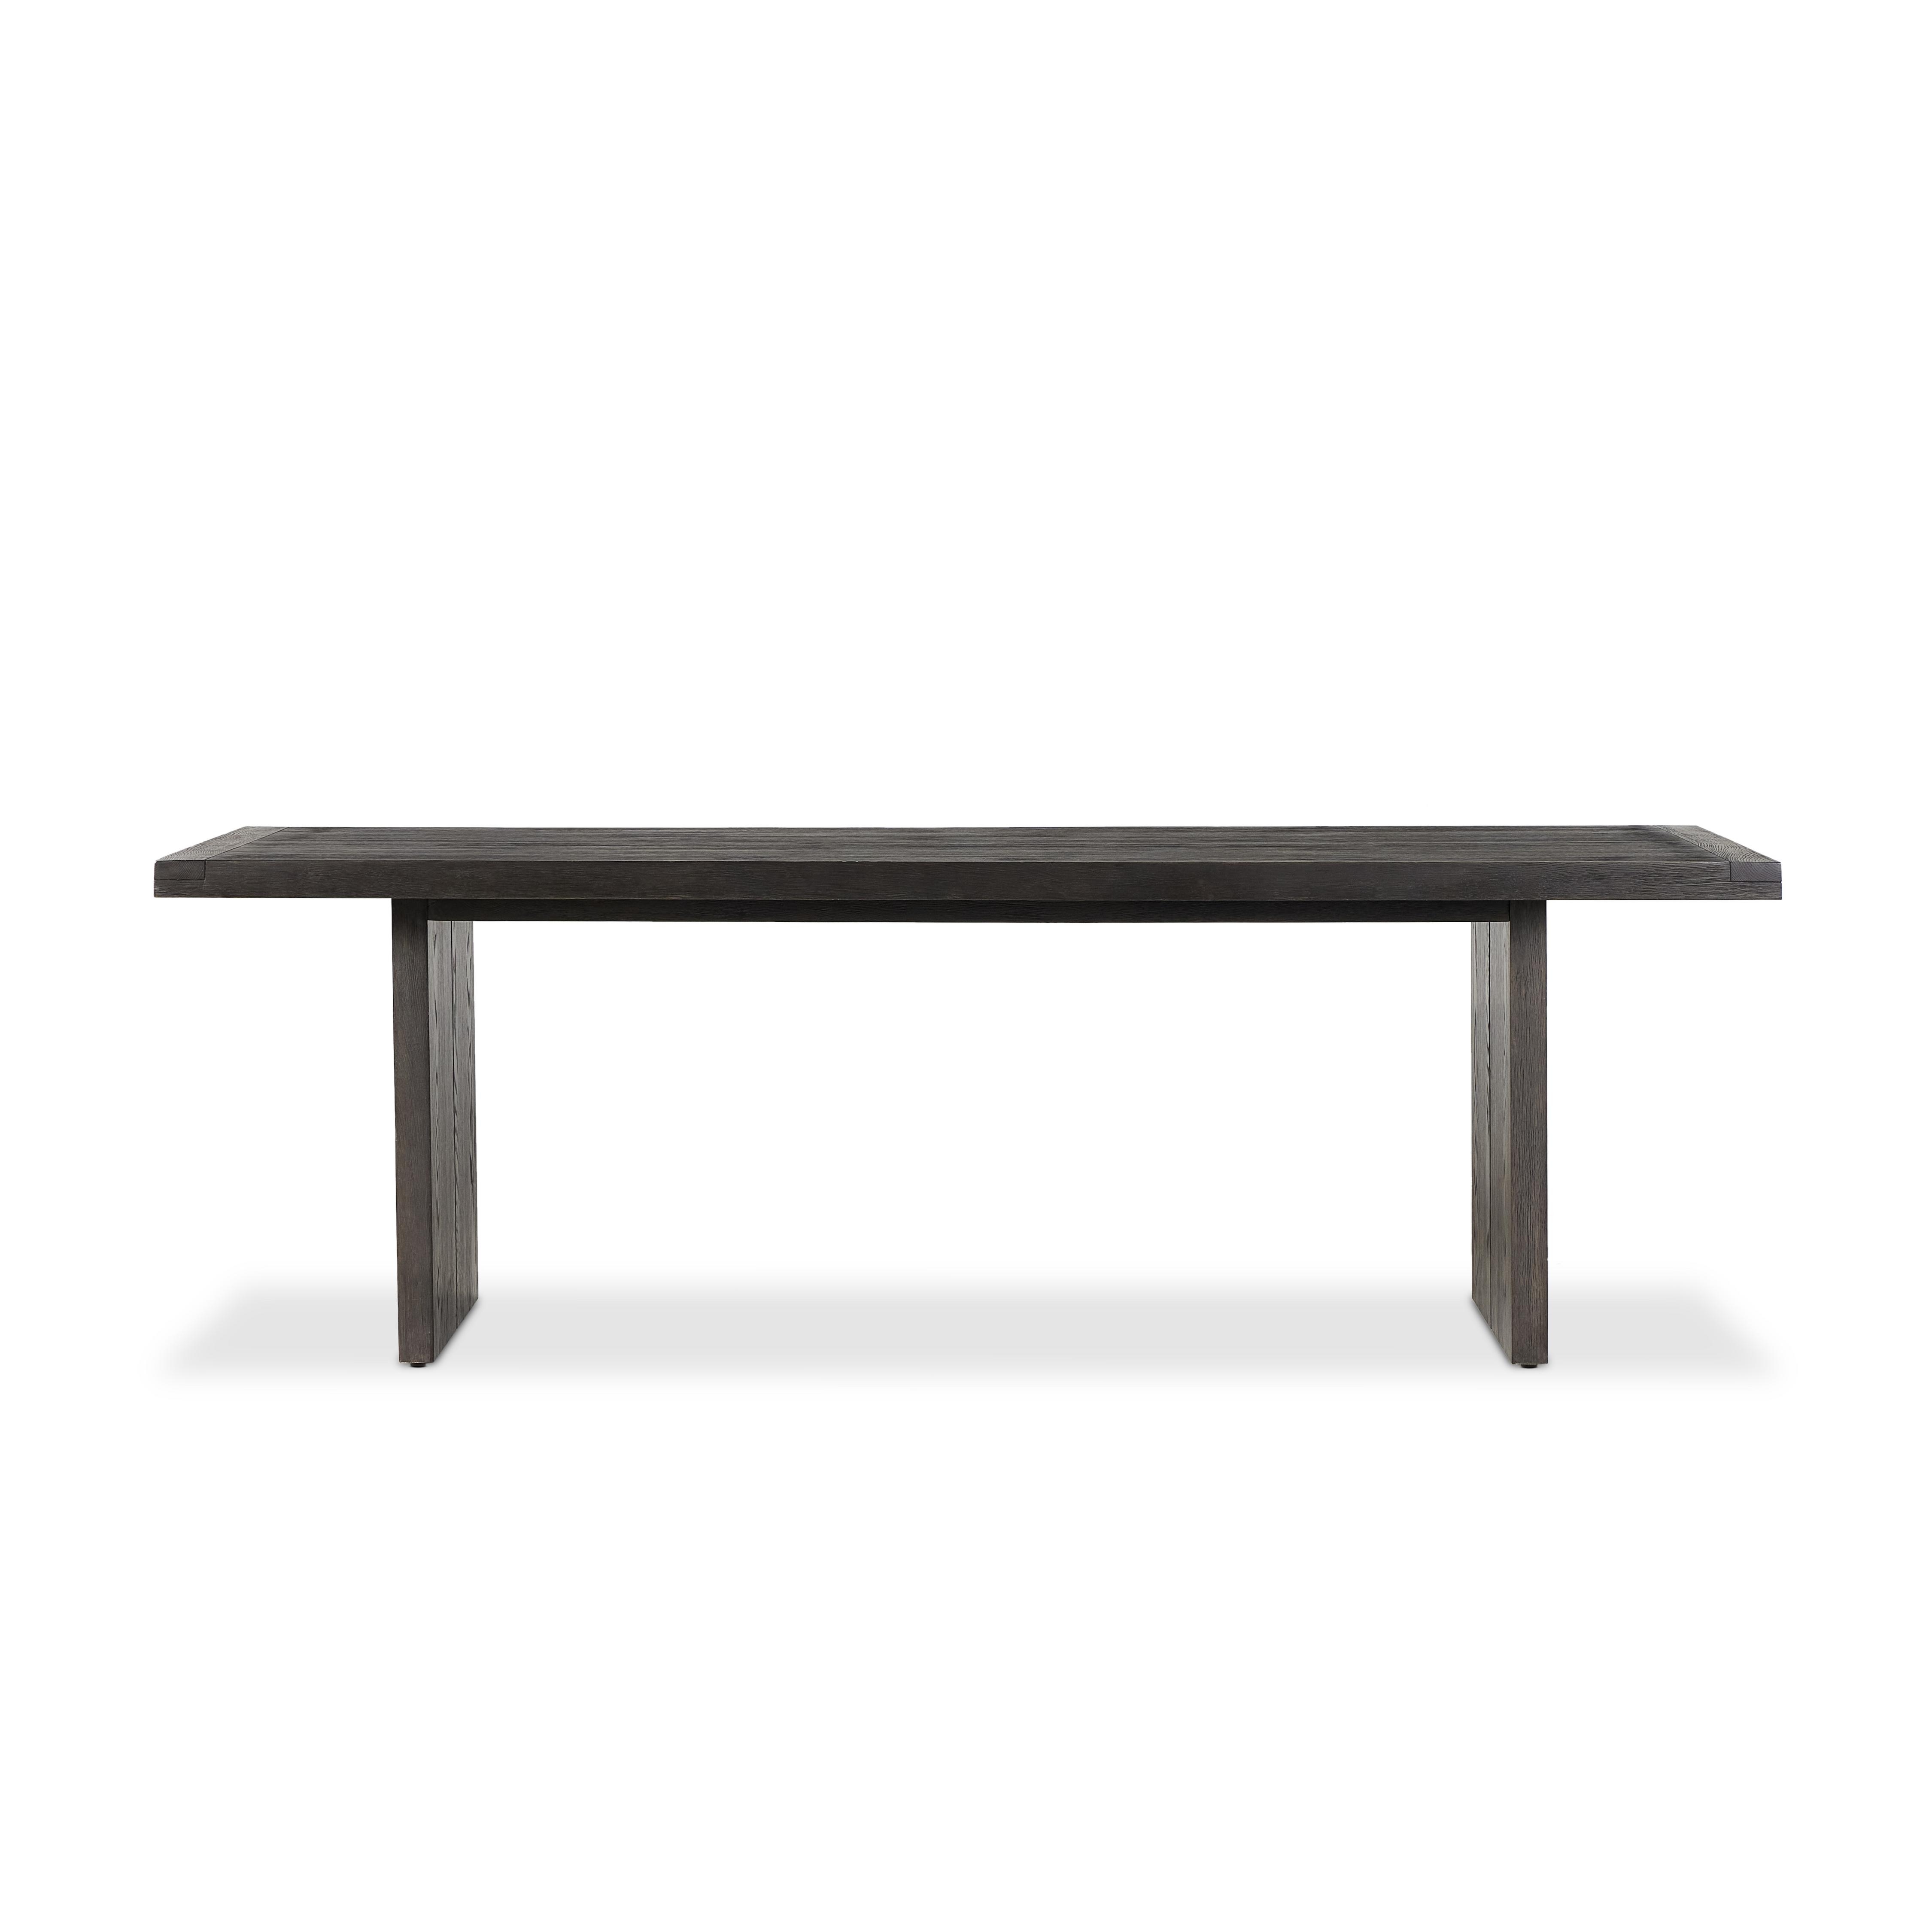 Warby Dining Table 94"-Worn Black Oak - Image 3